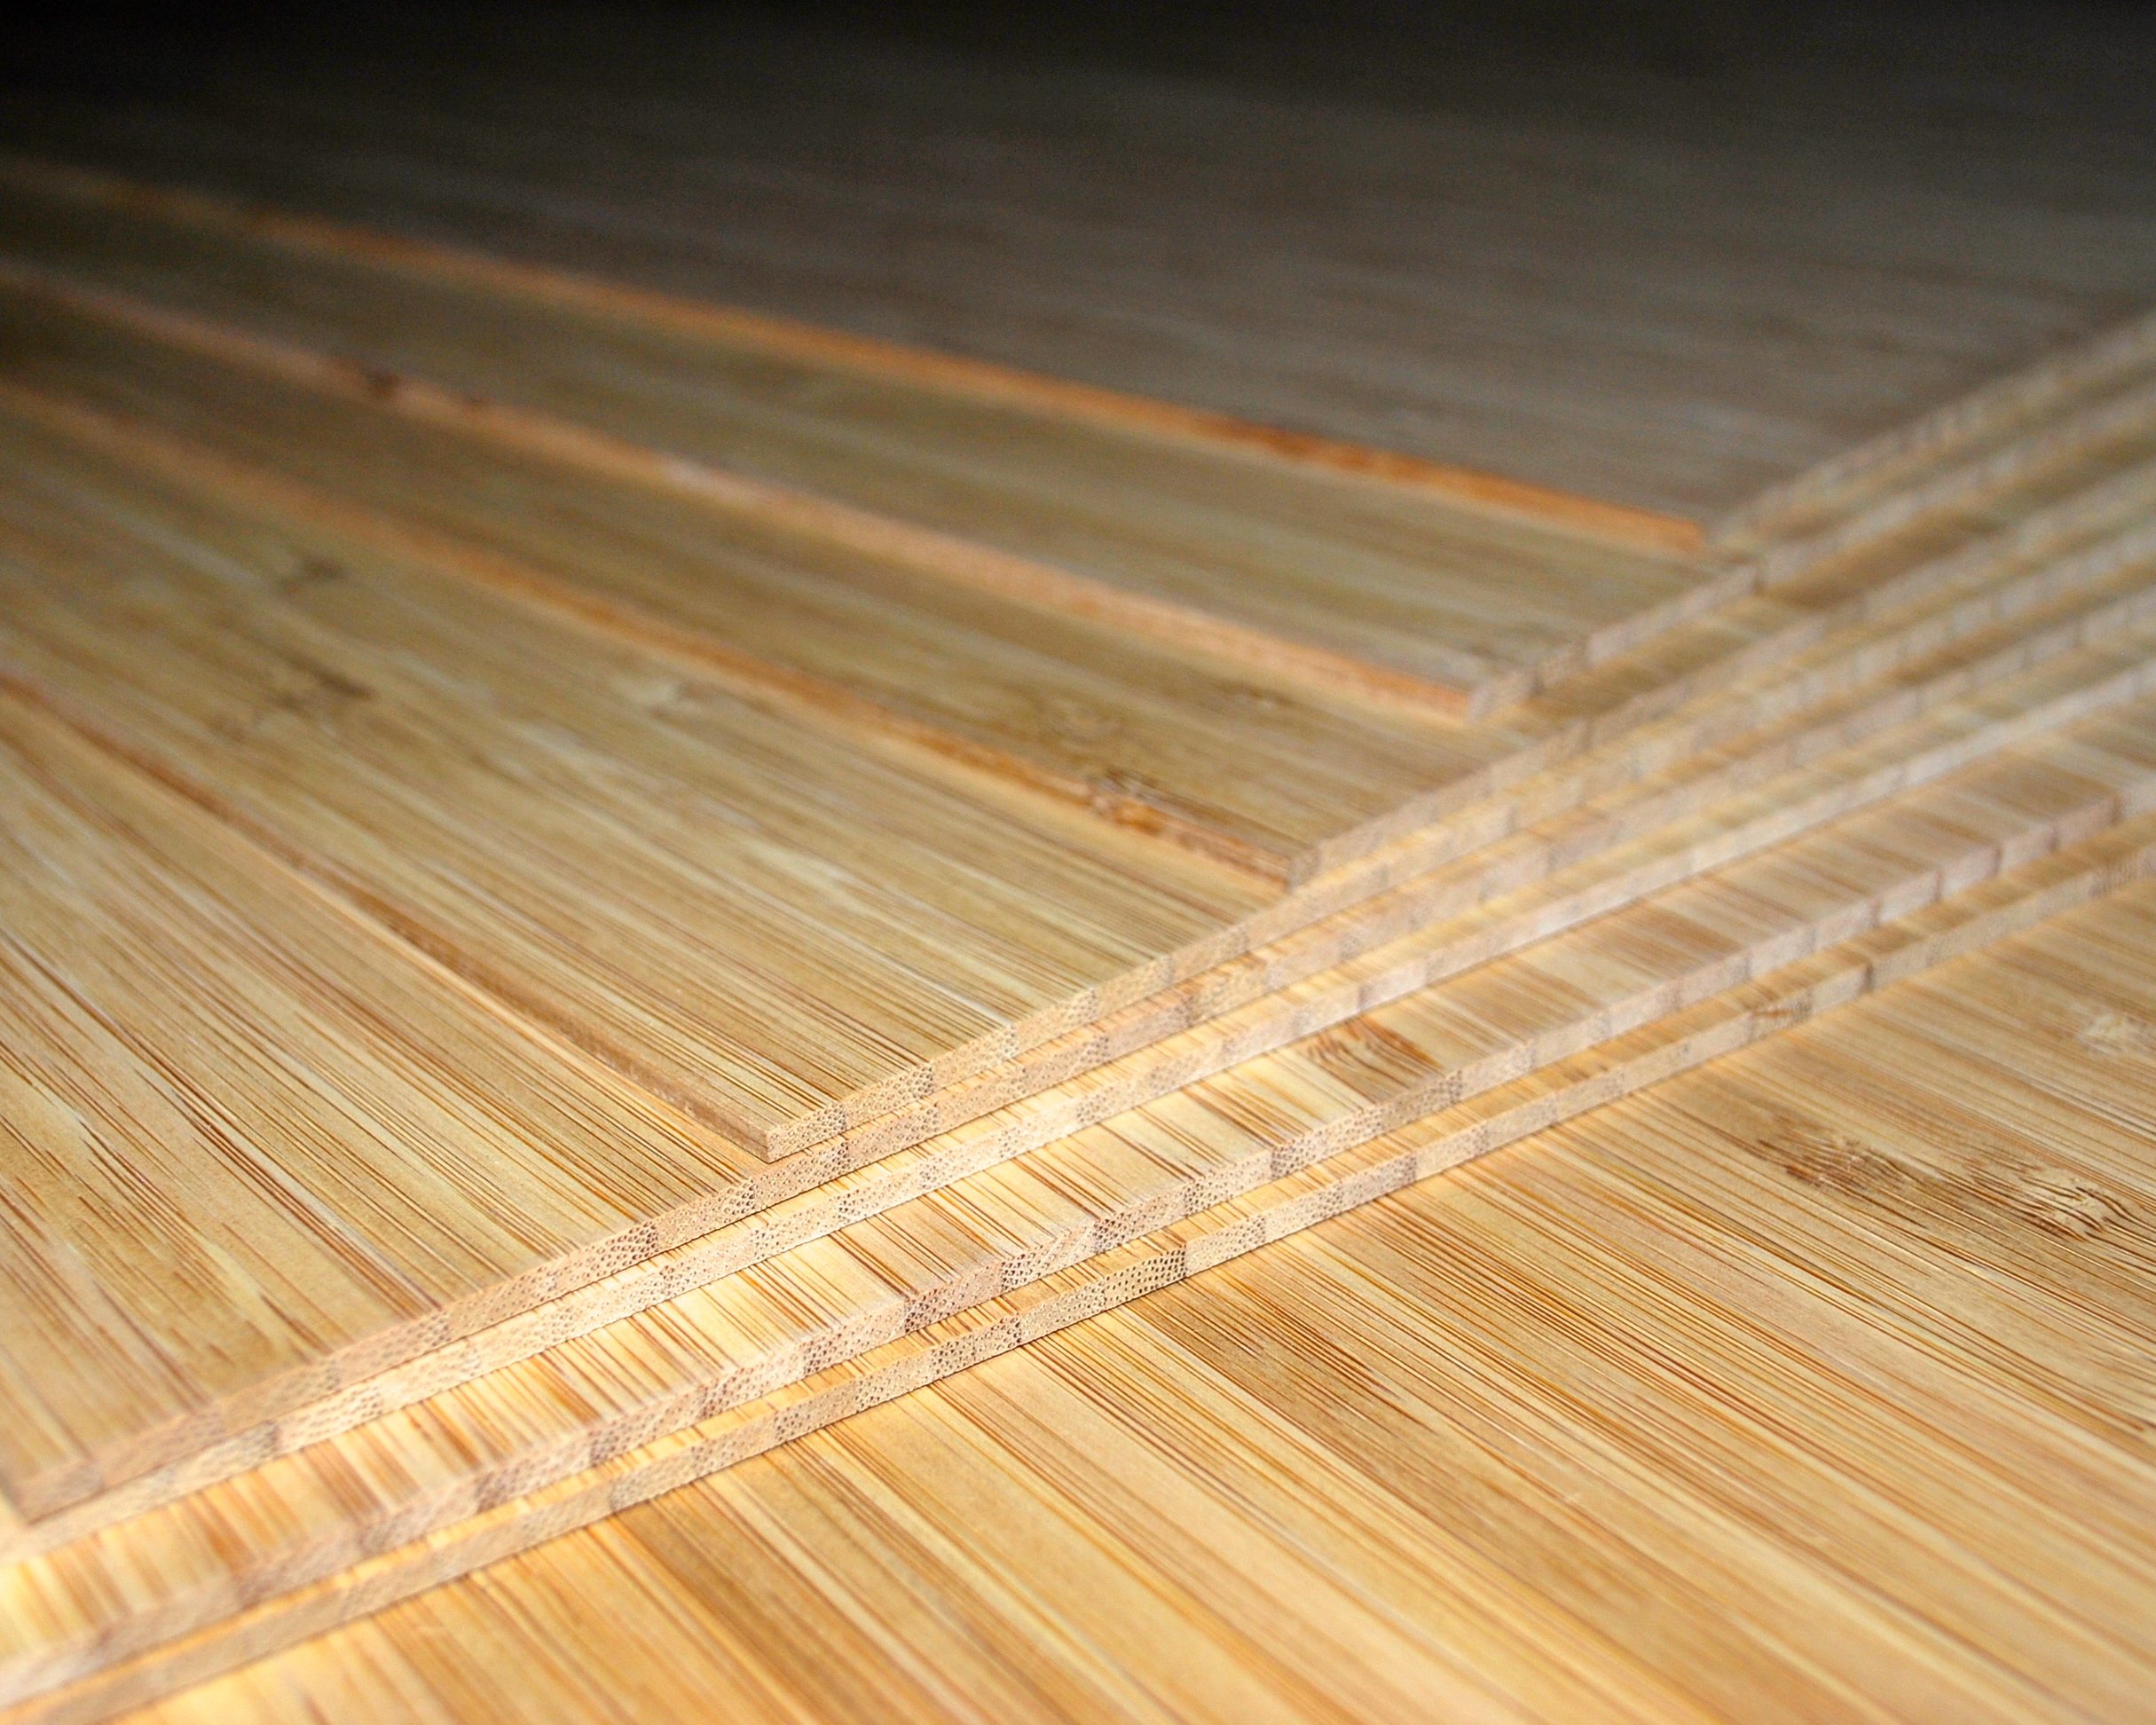 Bamboo Plywood & Lumber Products